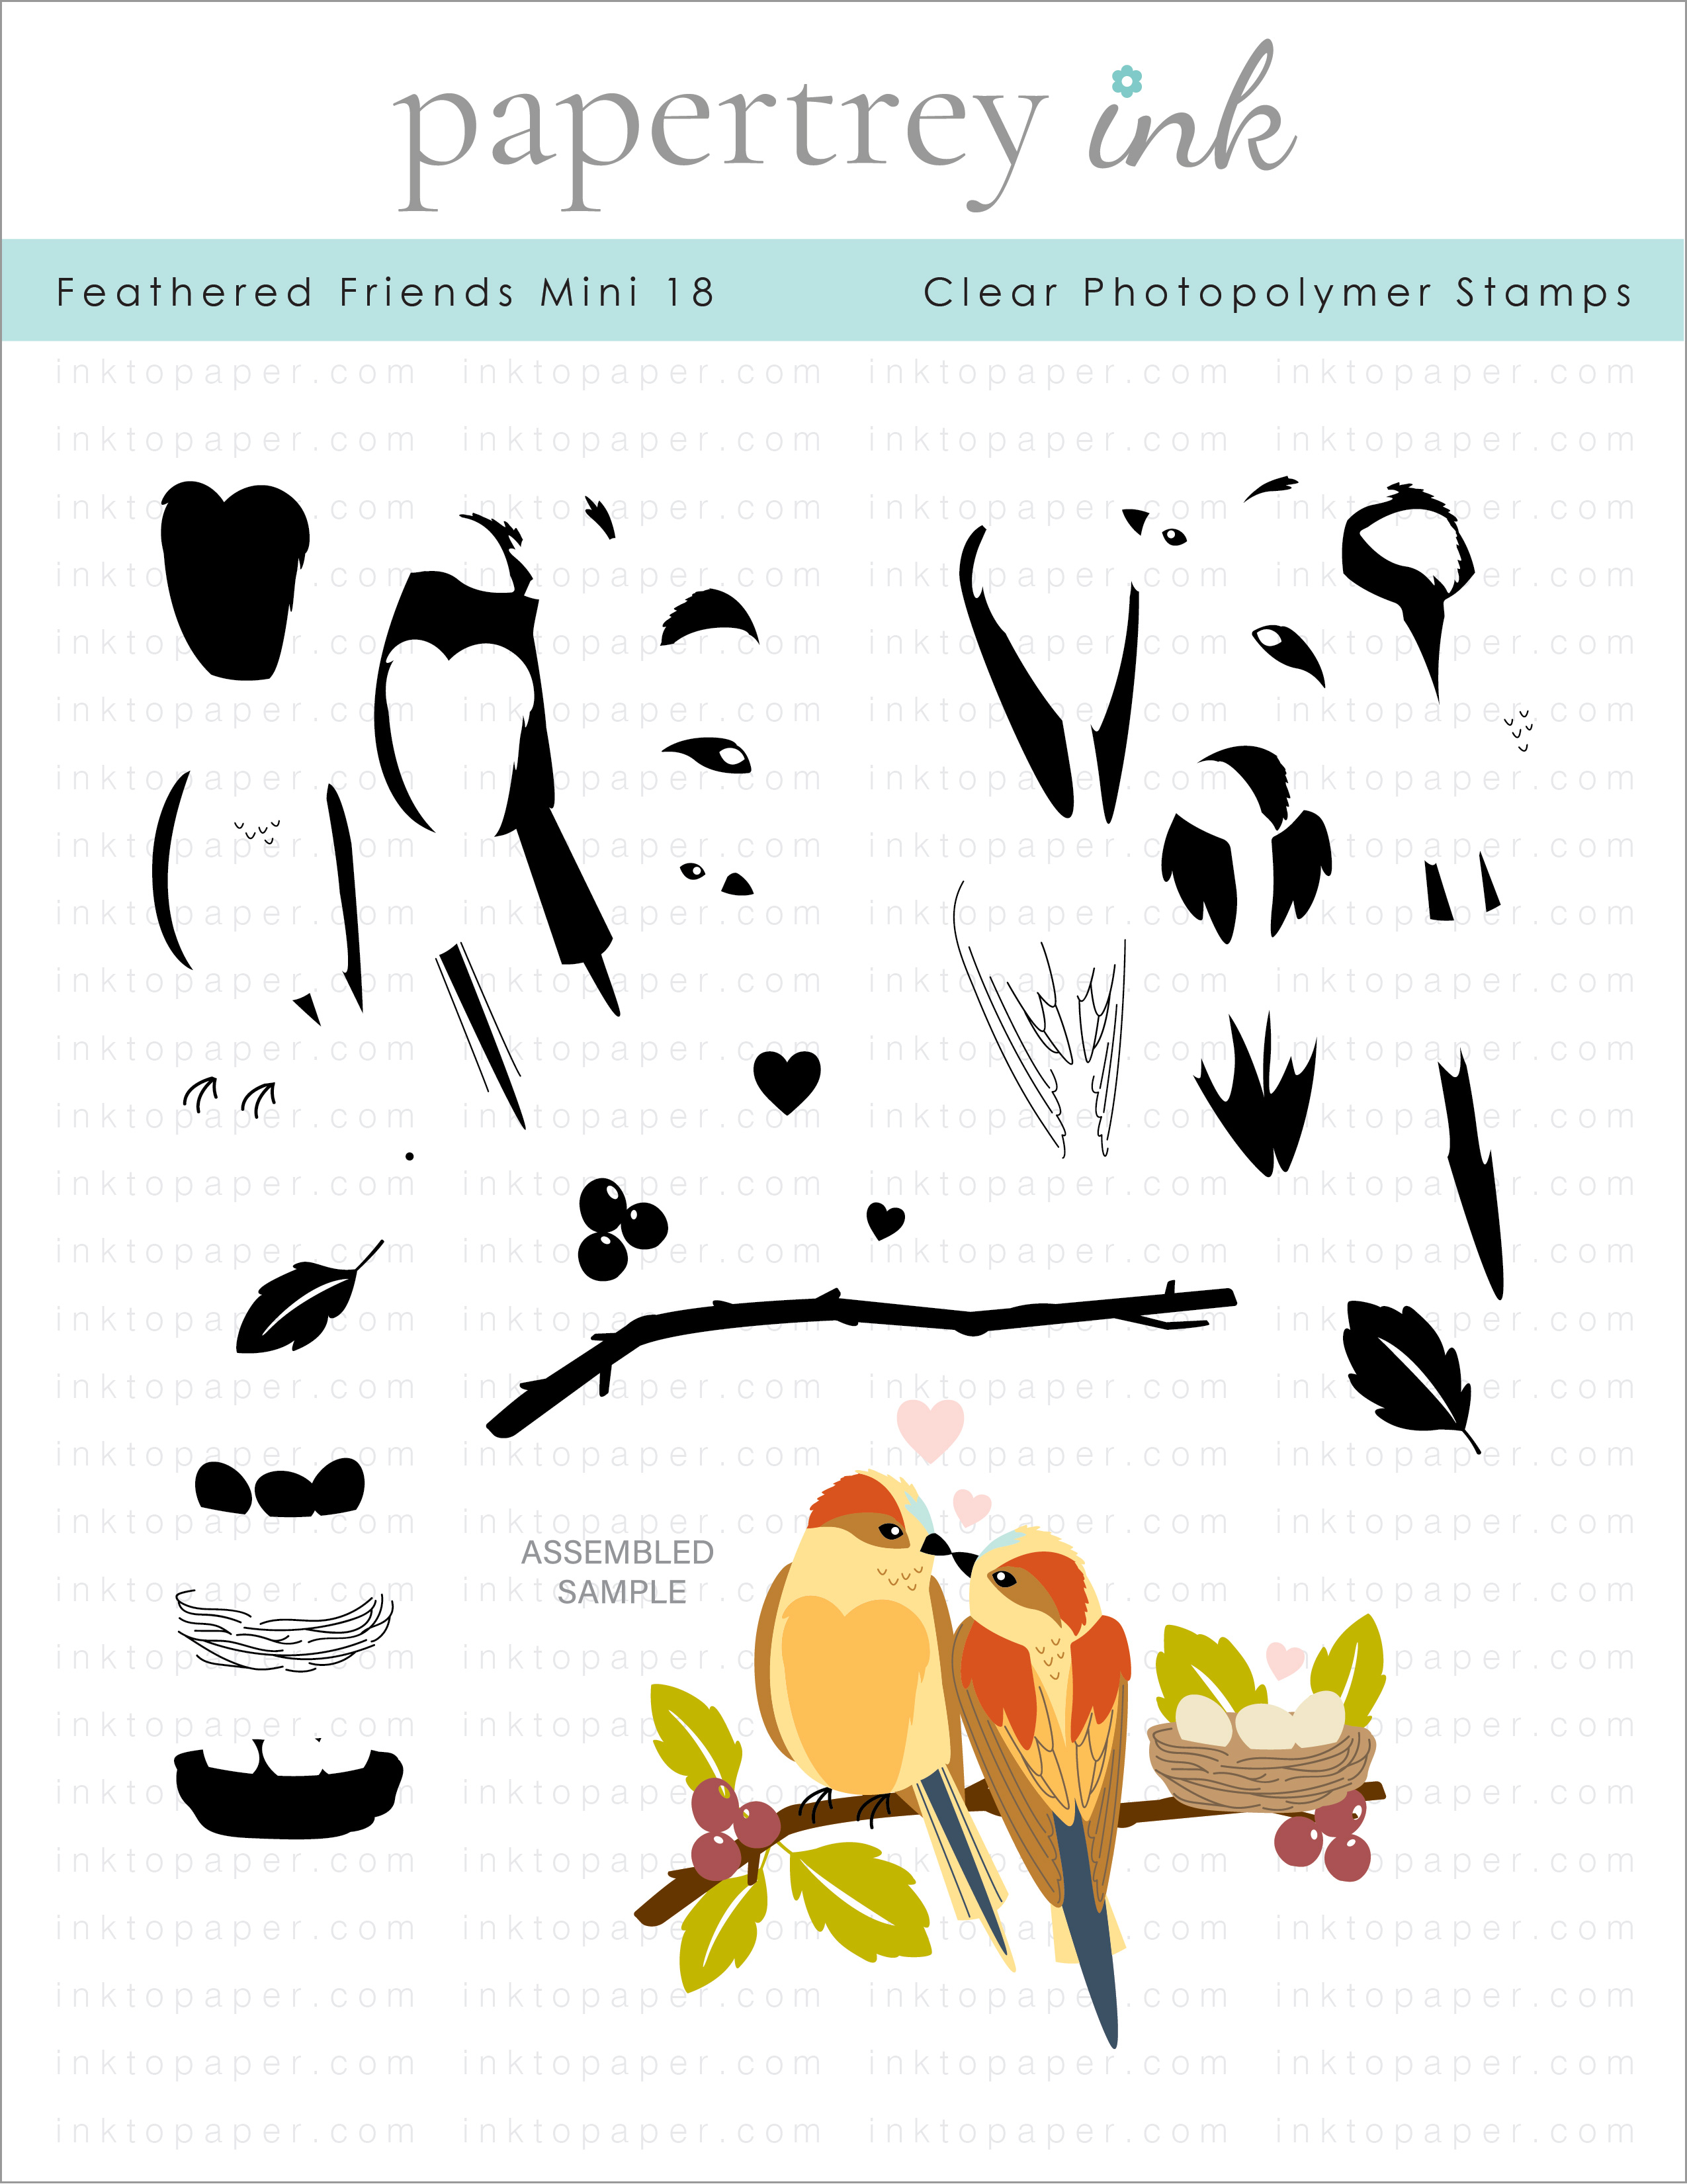 Feathered Friends Mini 18 Stamp Set: Papertrey Ink